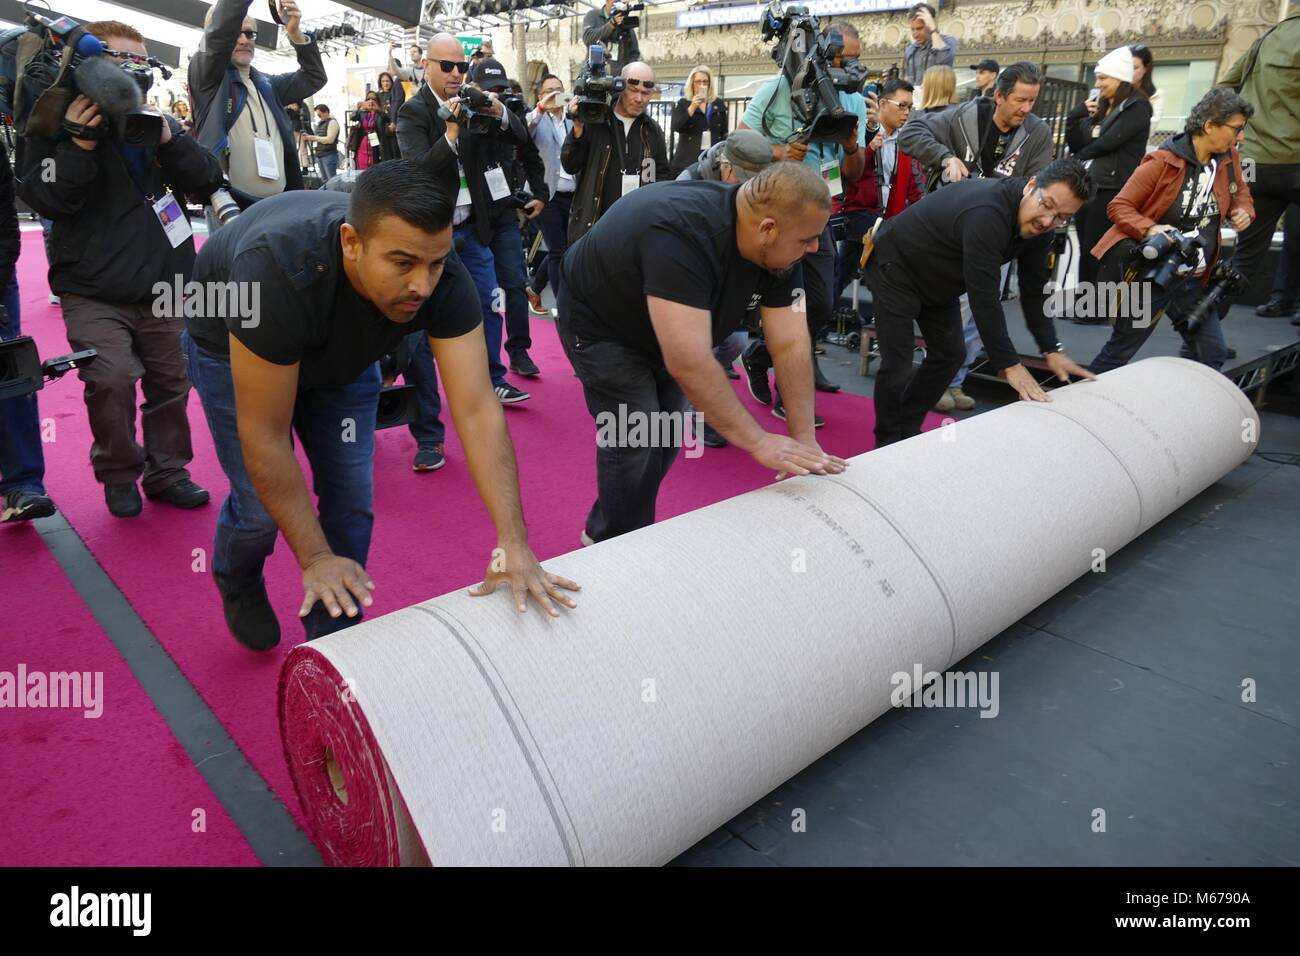 Los Angeles, USA. 26th Feb, 2018. Workers rolling out the red carpet in front of the Dolby theatre in Los Angeles, US, 26 February 2018. The Oscar Awards take place there on 04 March 2018. Credit: Barbara Munker/dpa/Alamy Live News Stock Photo